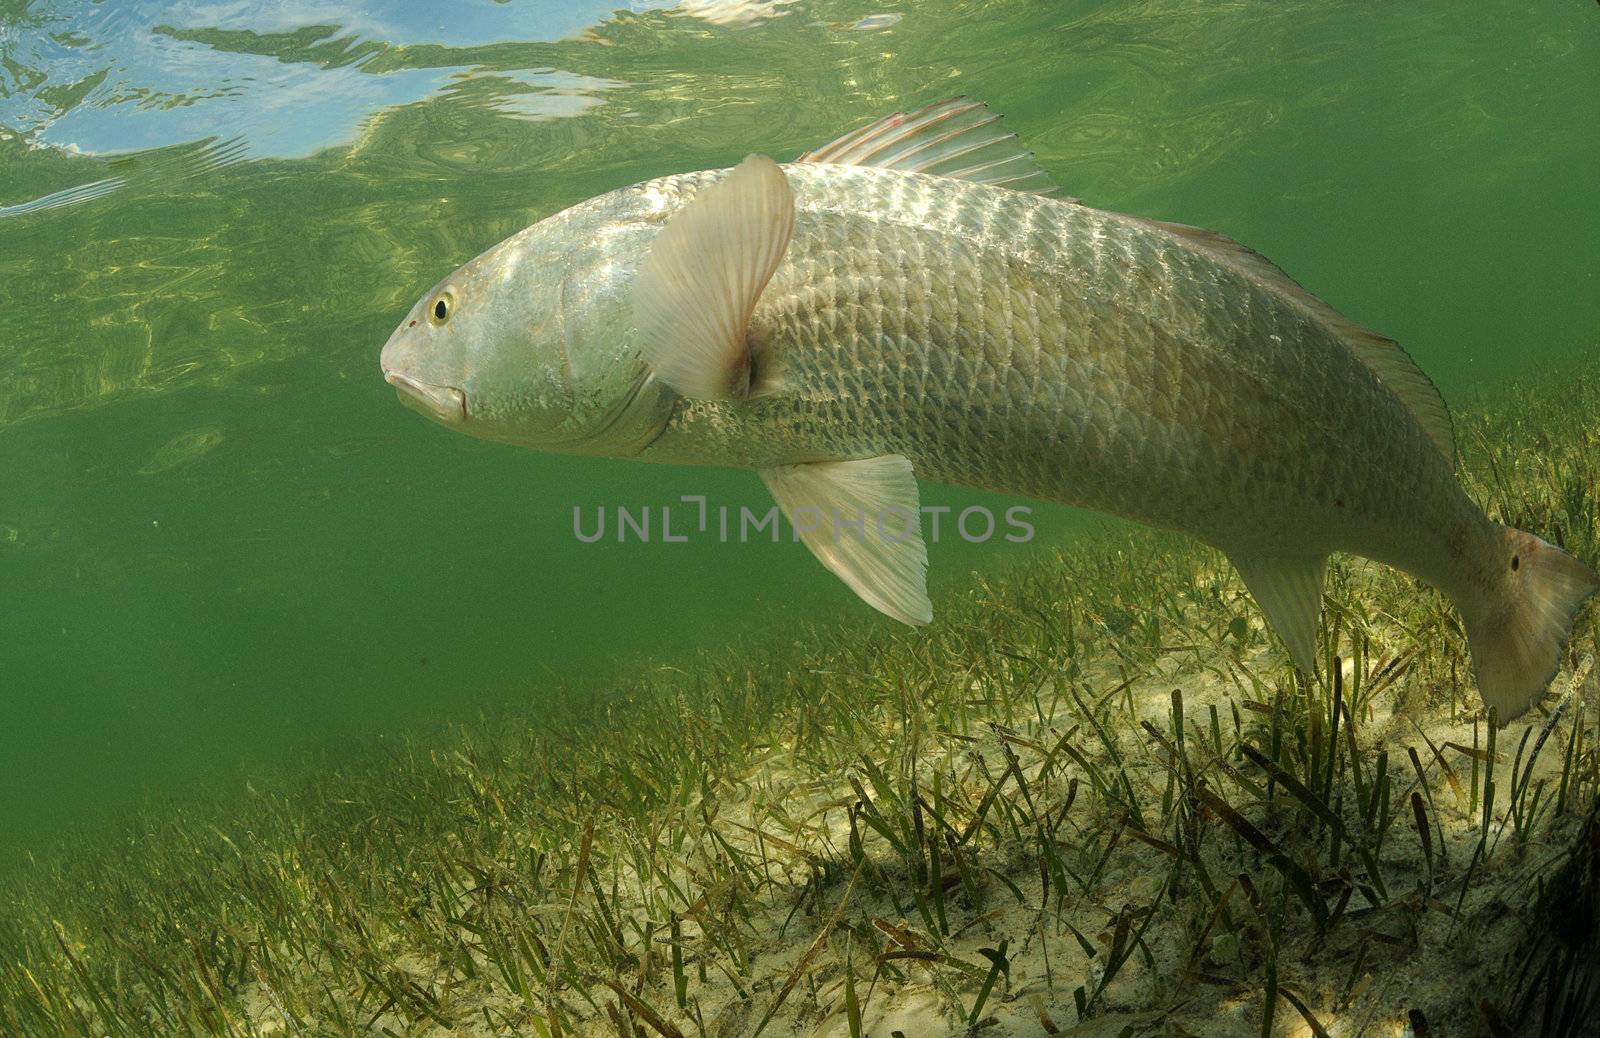 redfish is swimming in the grass flats ocean  by ftlaudgirl